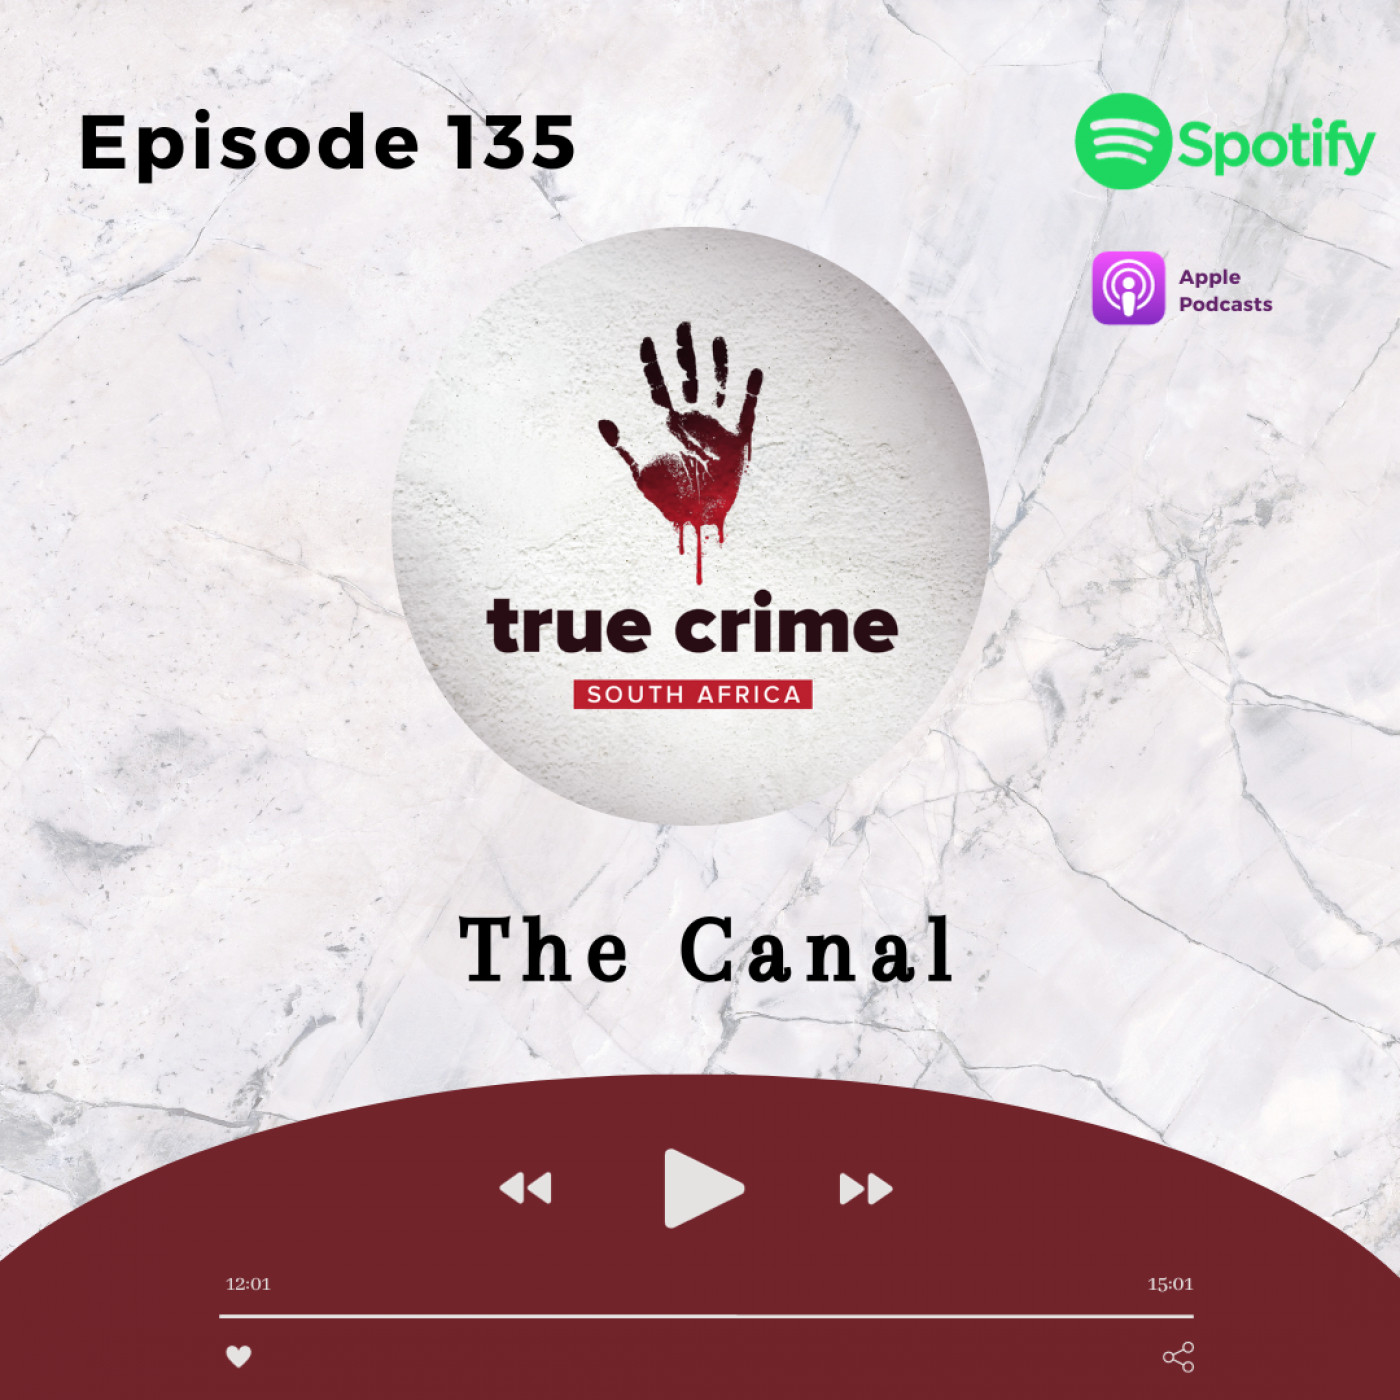 Episode 135 The Canal